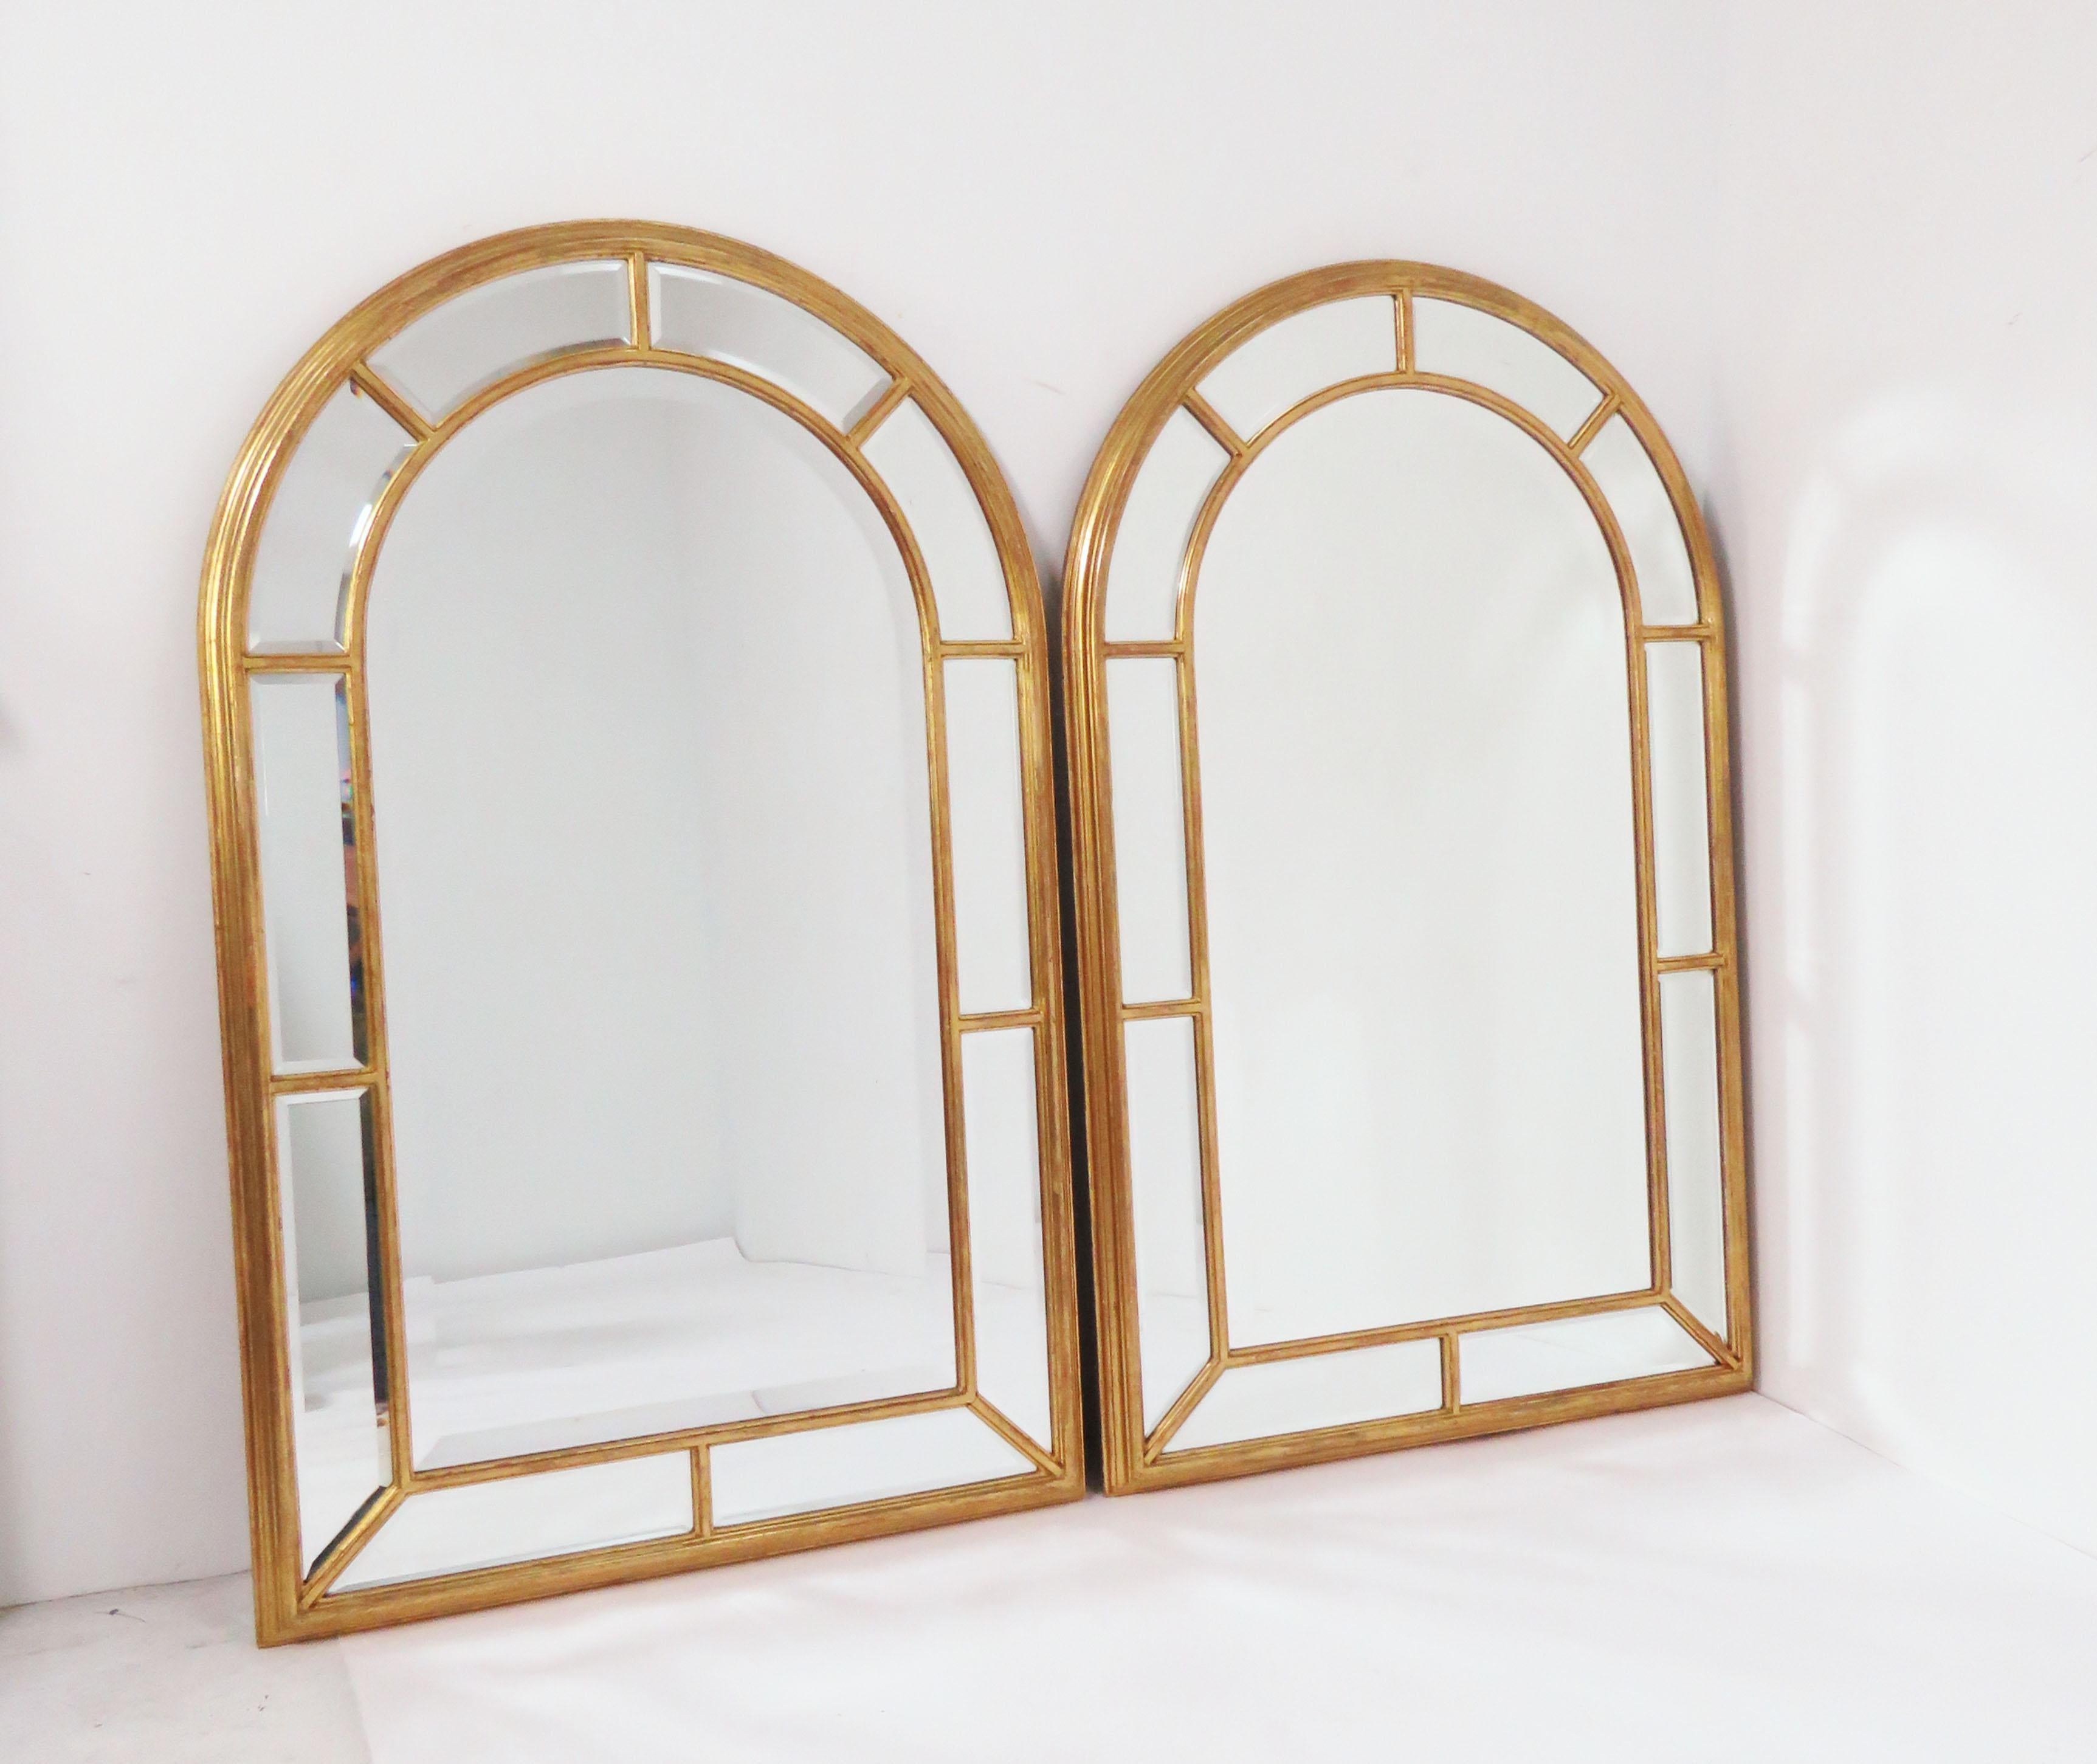 Pair of giltwood wall mirrors, circa 1970s, made in Florence, Italy for LaBarge. Palladian form with individually beveled panes.